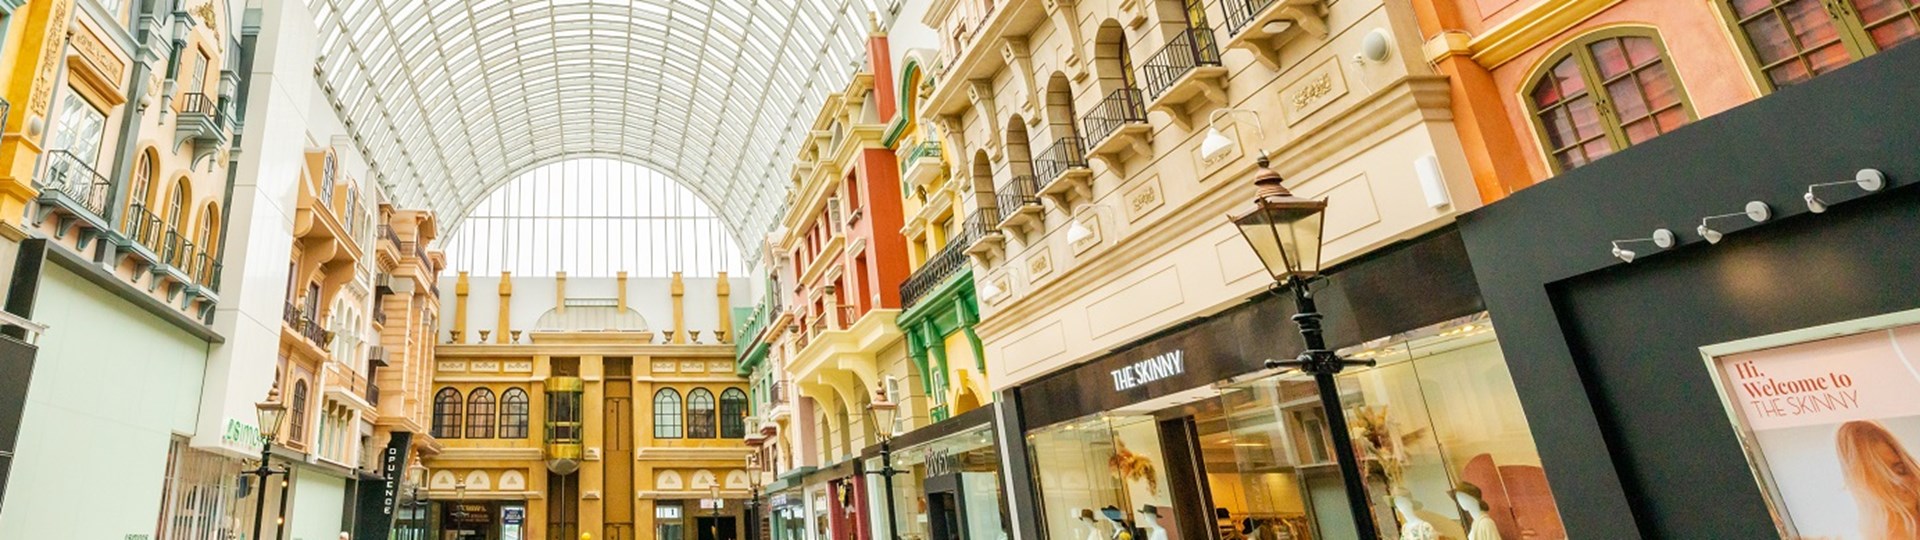 Time for a WEM Vacation? Here Are the Things to Do at West Edmonton Mall